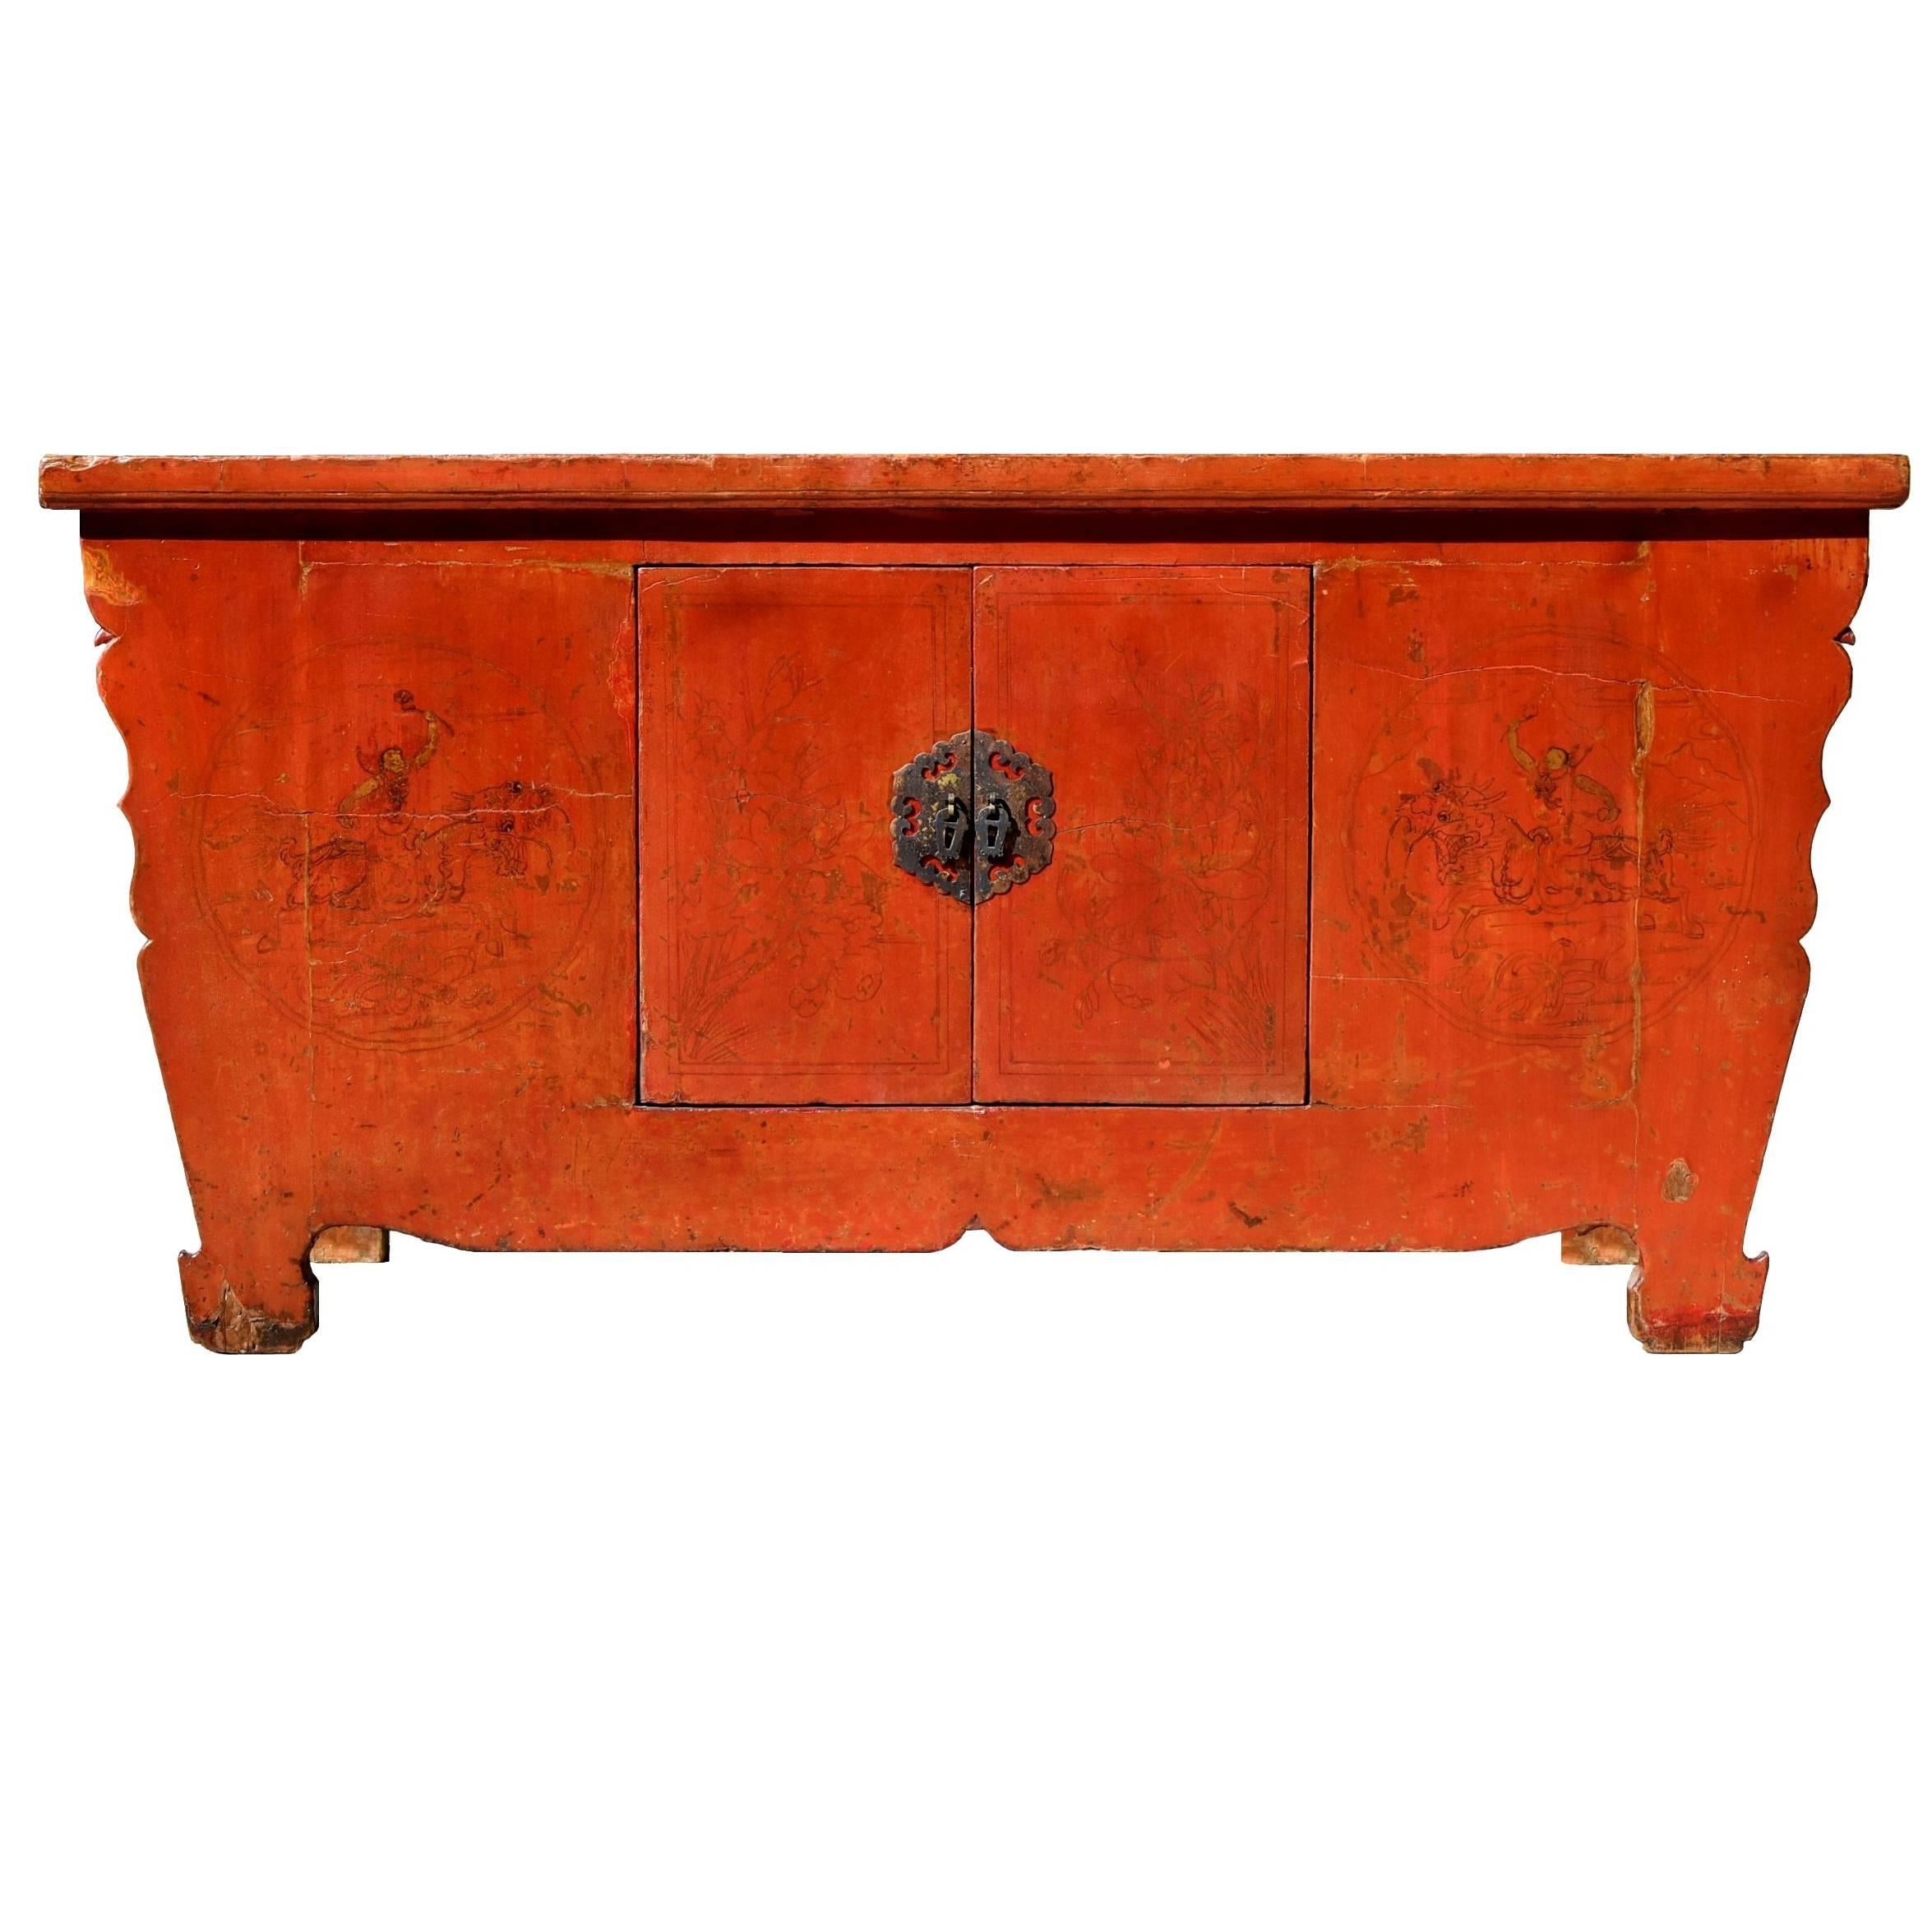 19th Century Red Lacquer Harmony Chest, with Single Solid Slab Top